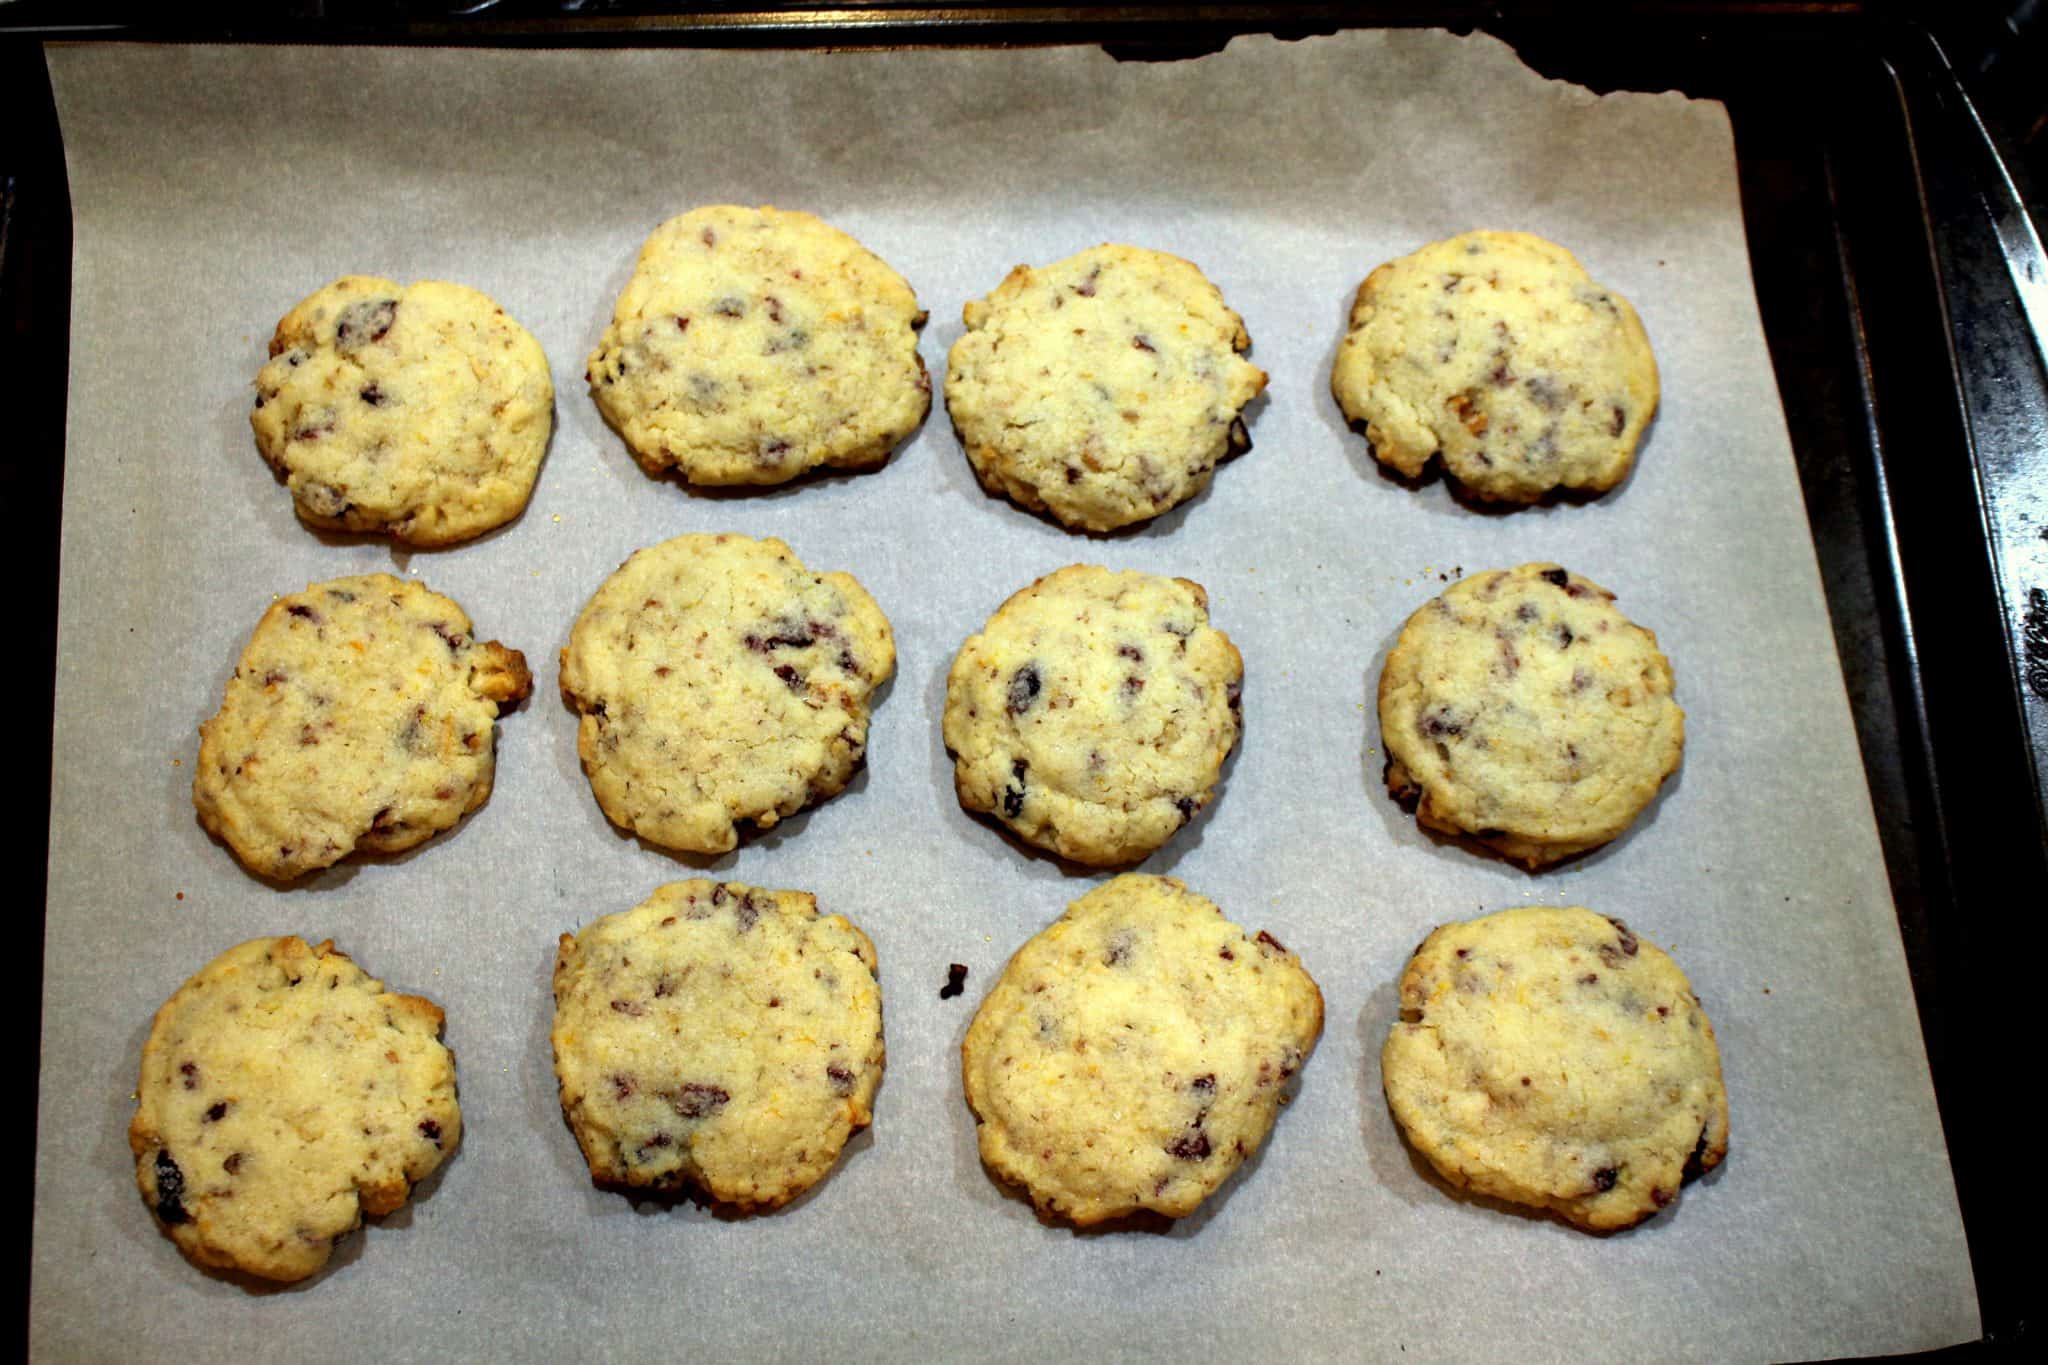 Cranberry Walnut Cookies on Baking Tray